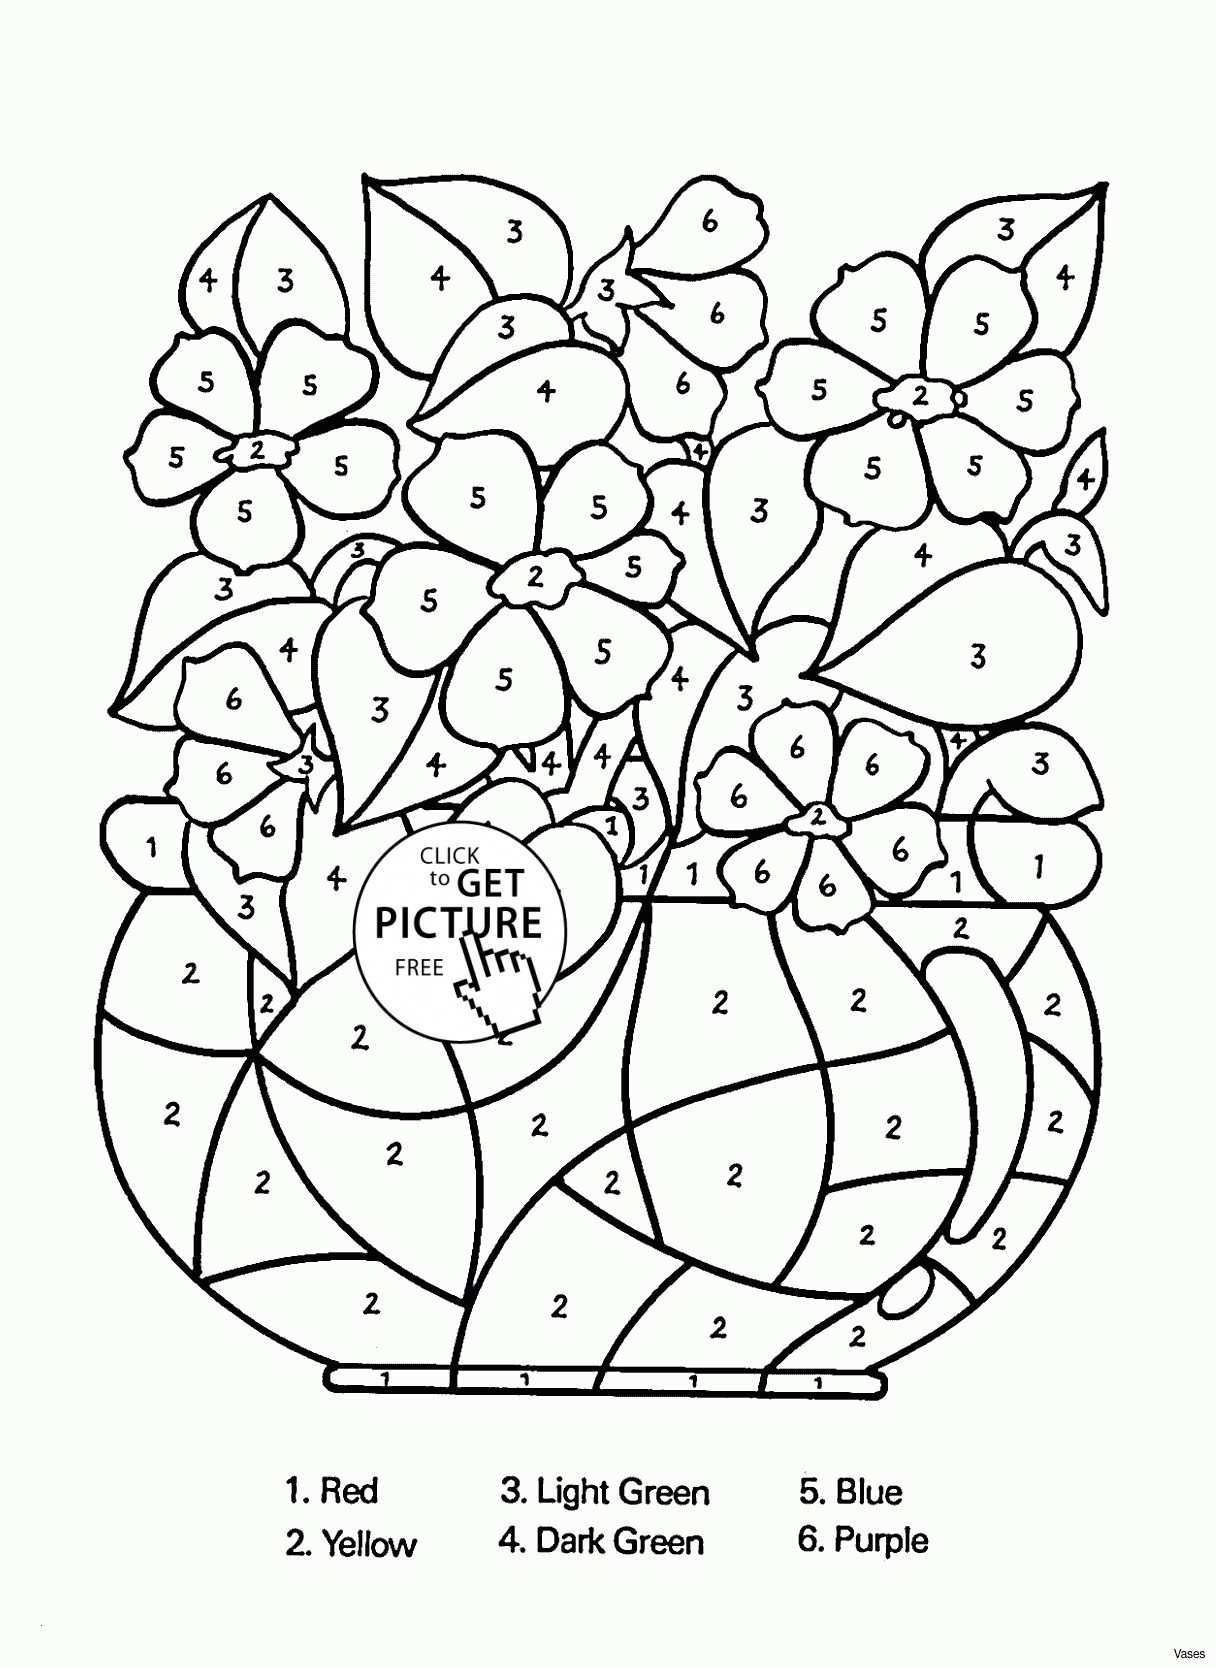 Personalized Coloring Pages Personalized Coloring Pages Inspirational Birthday Coloring Book